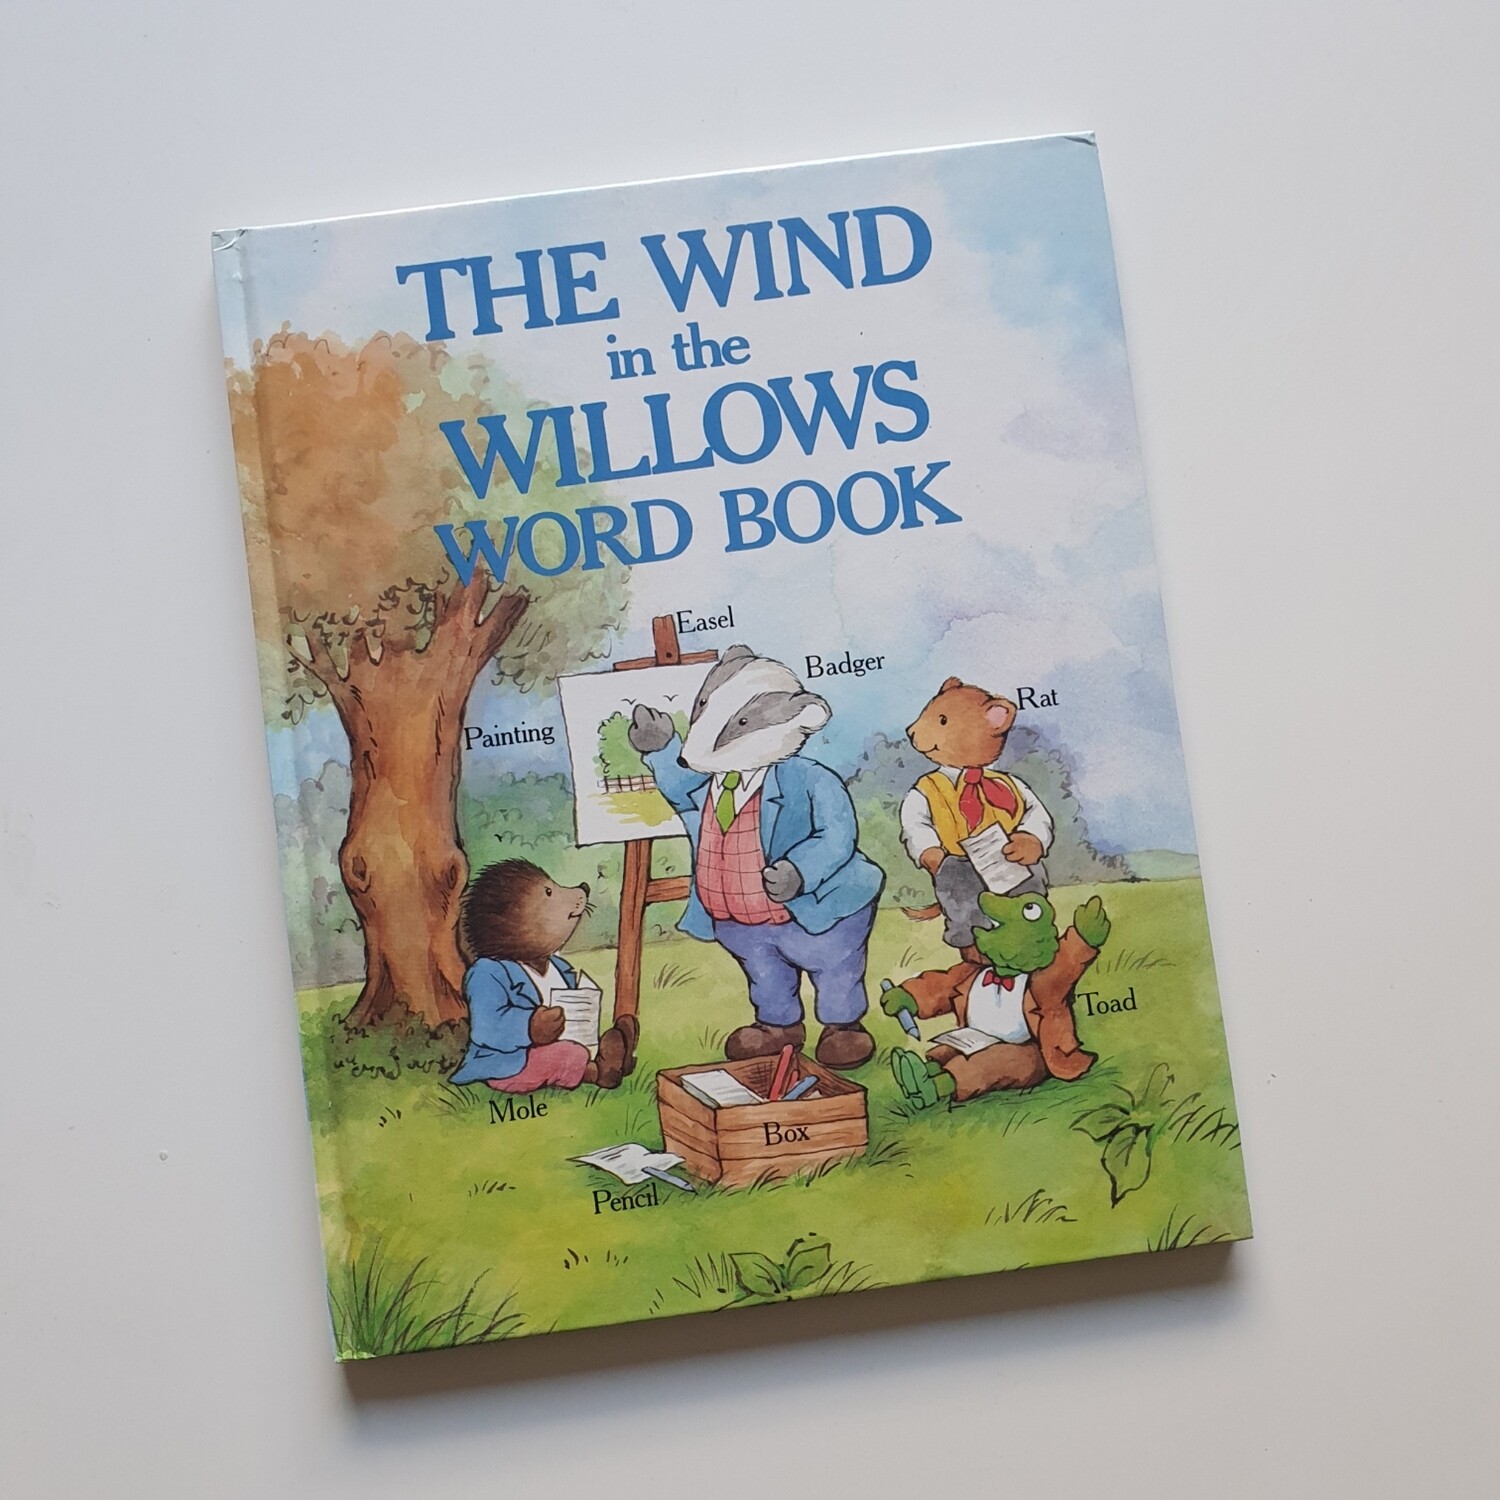 The Wind in the Willows Word Book